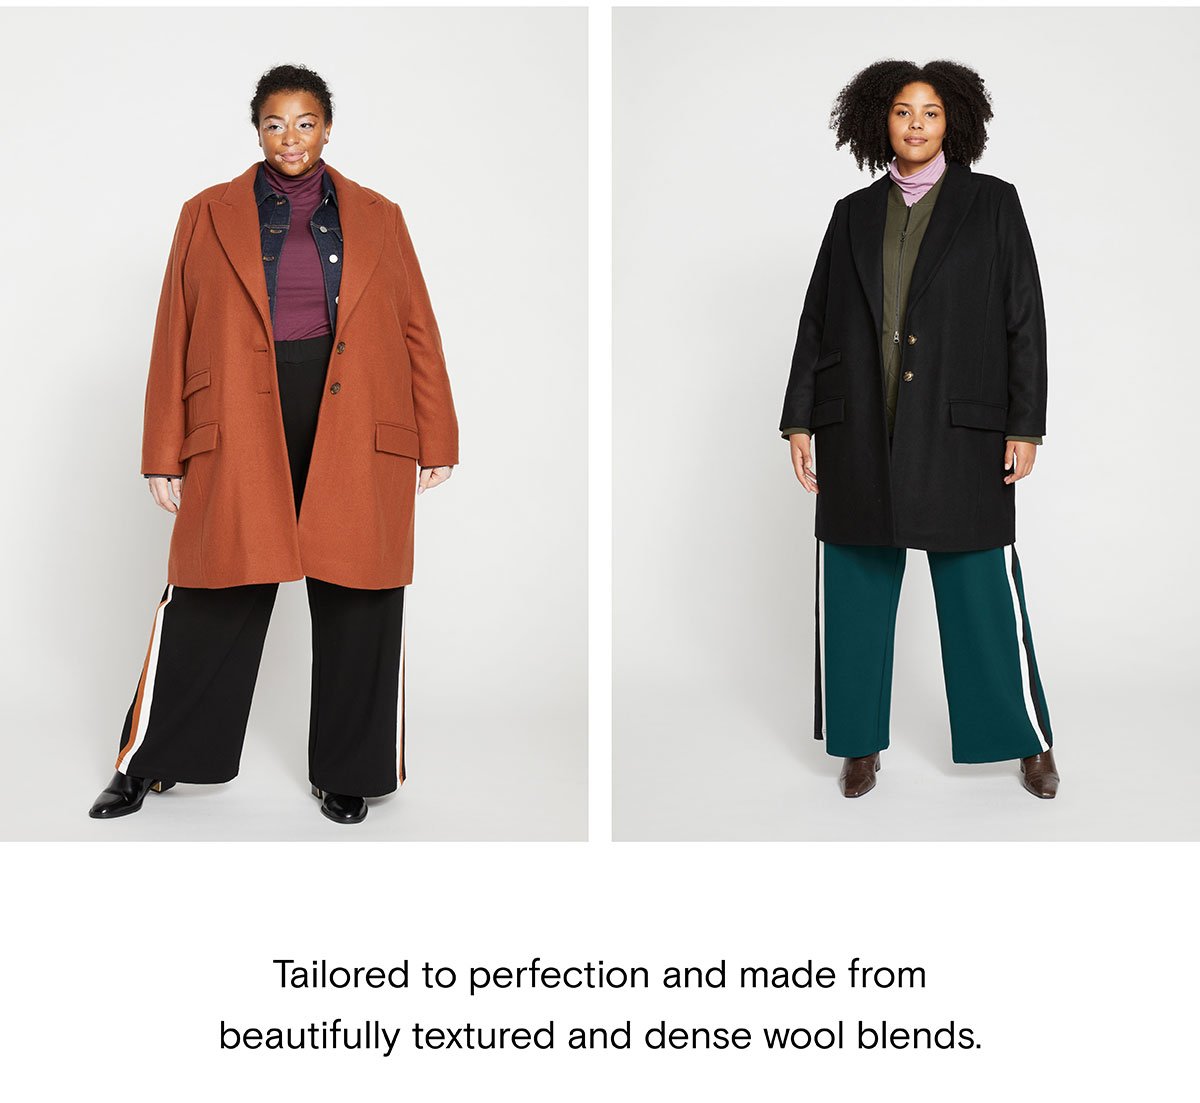 These coats are tailored to perfection